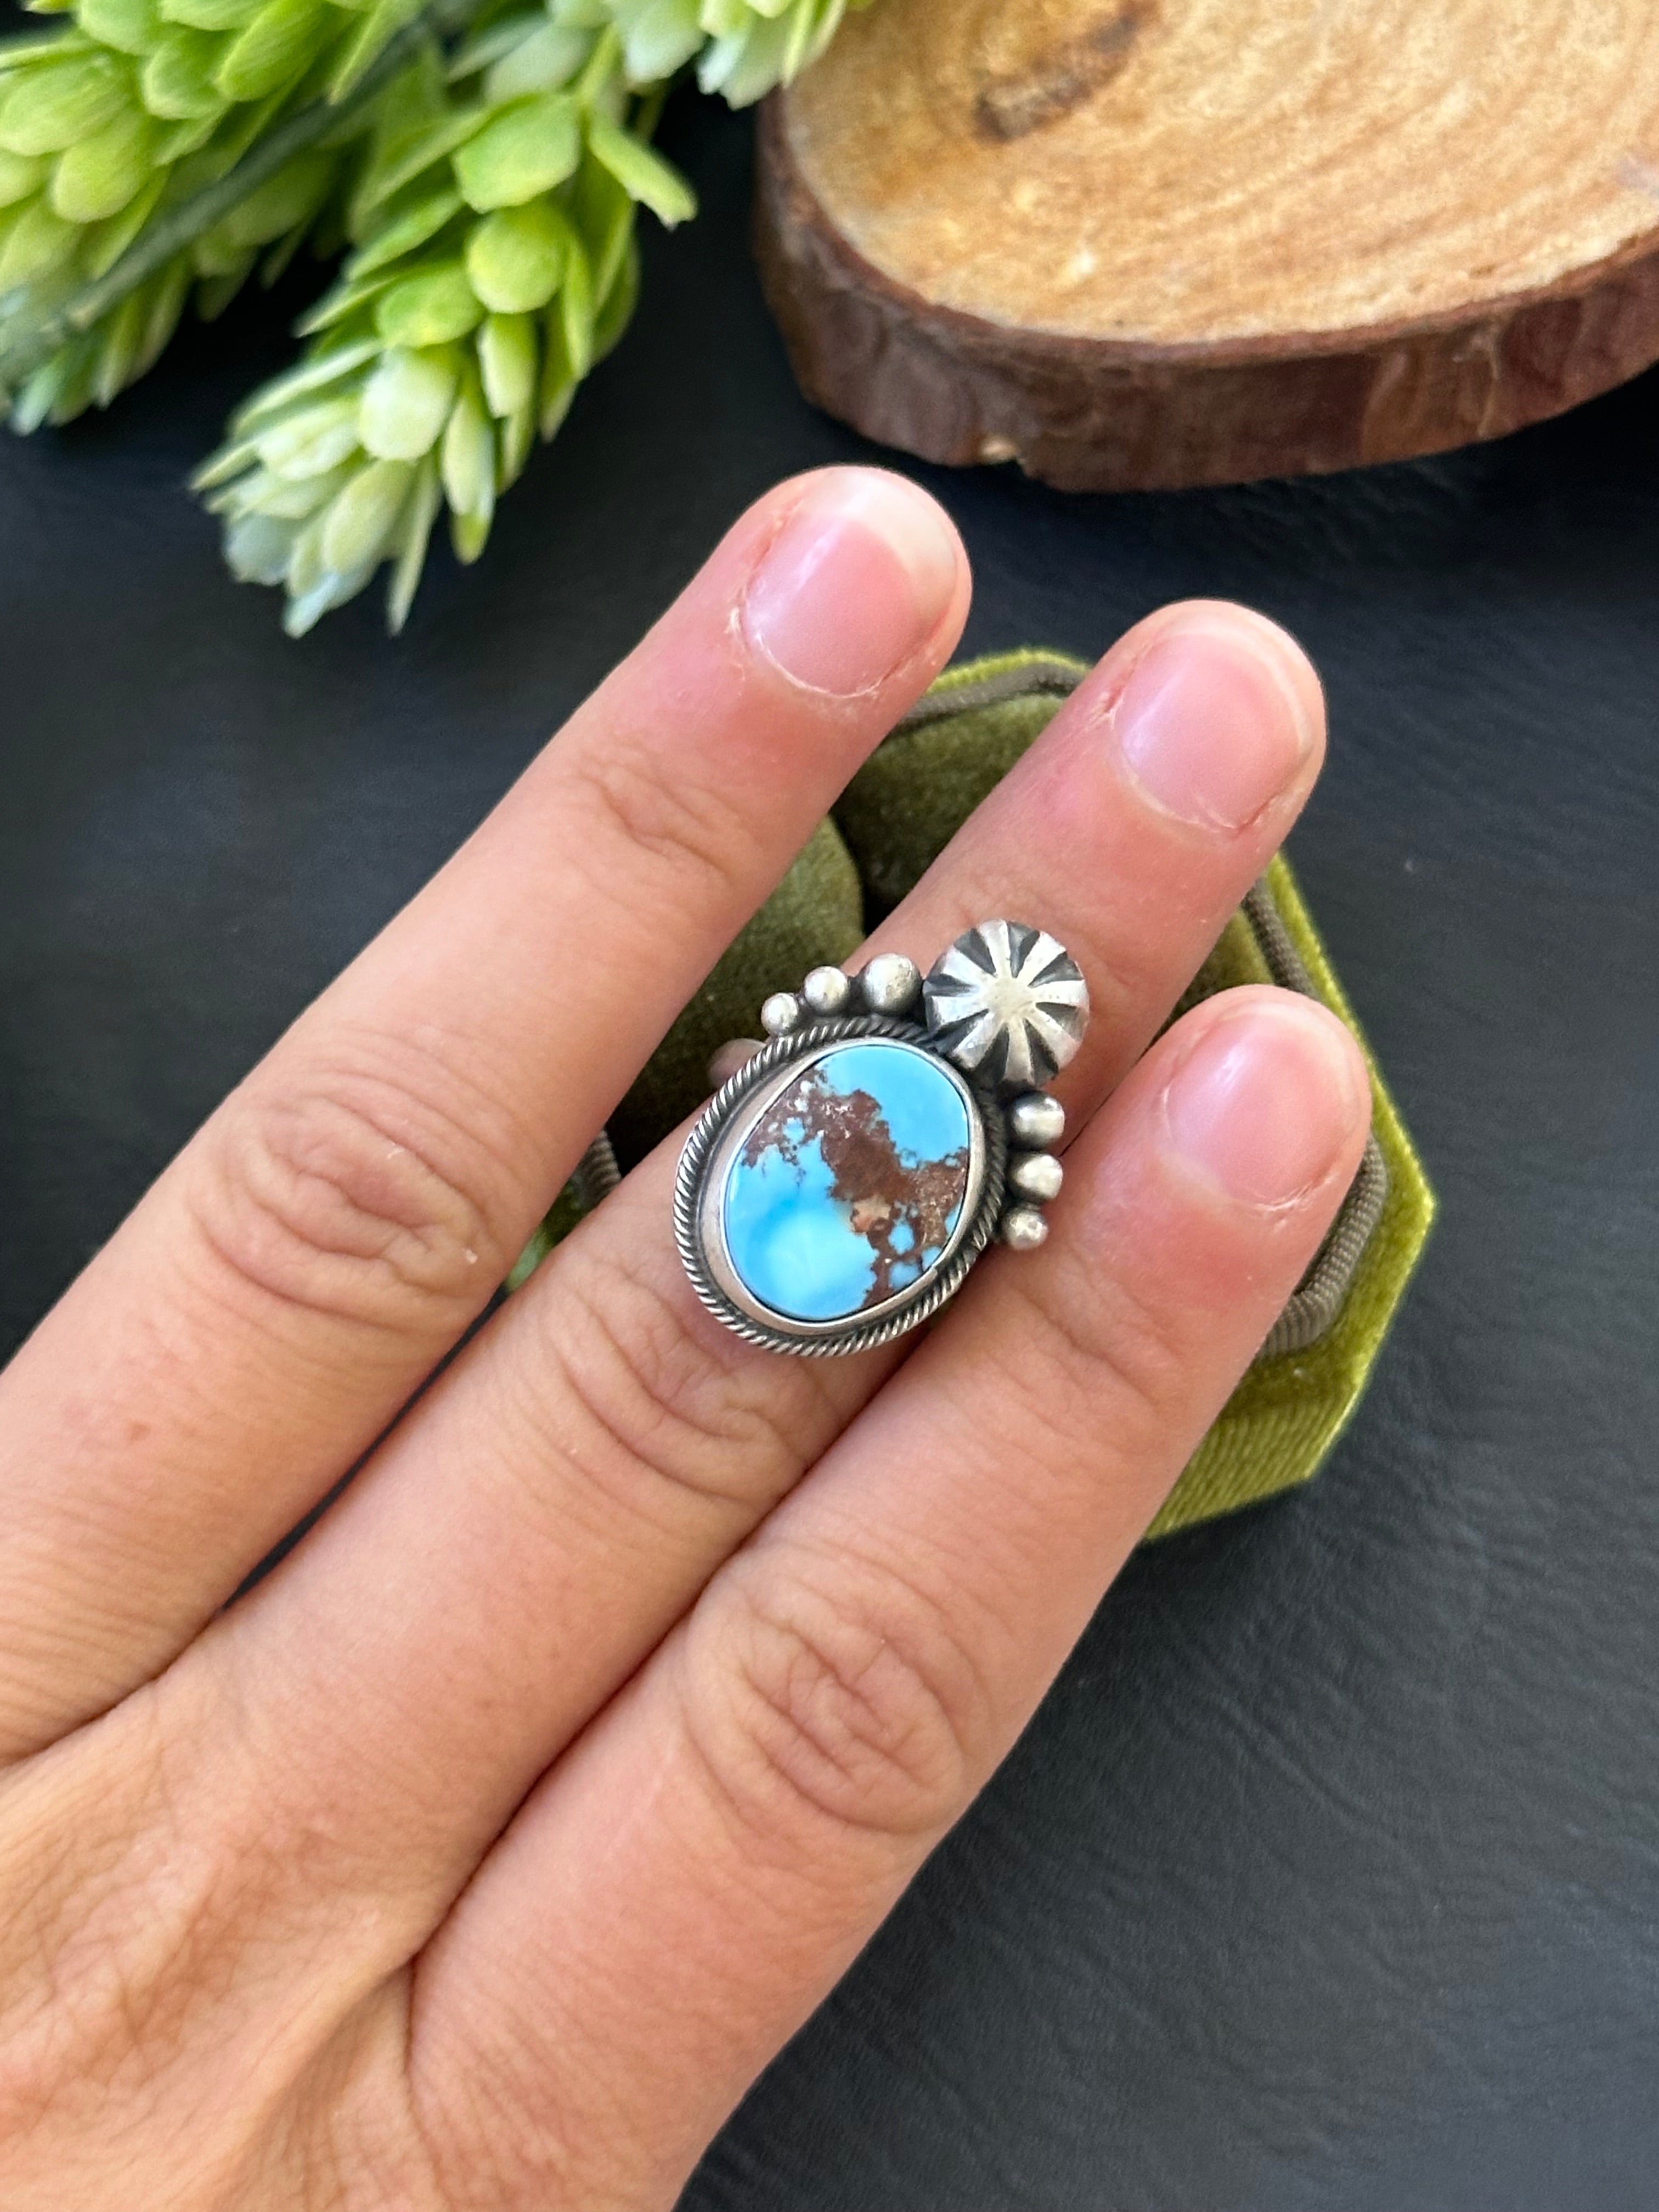 Marie Tsosie Golden Hills Turquoise & Sterling Silver Ring Size 5.25